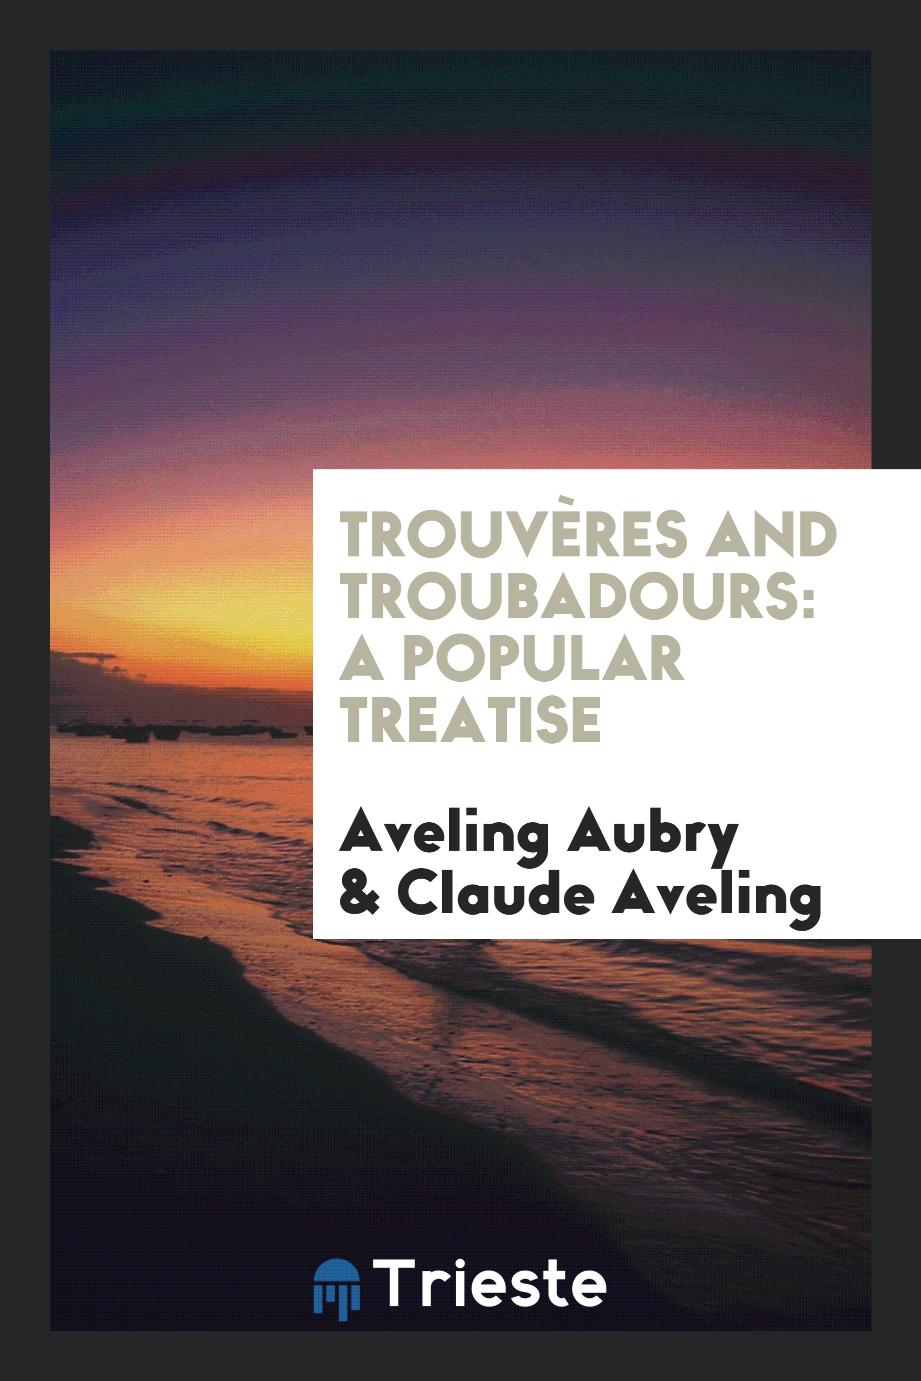 Trouvères and Troubadours: A Popular Treatise